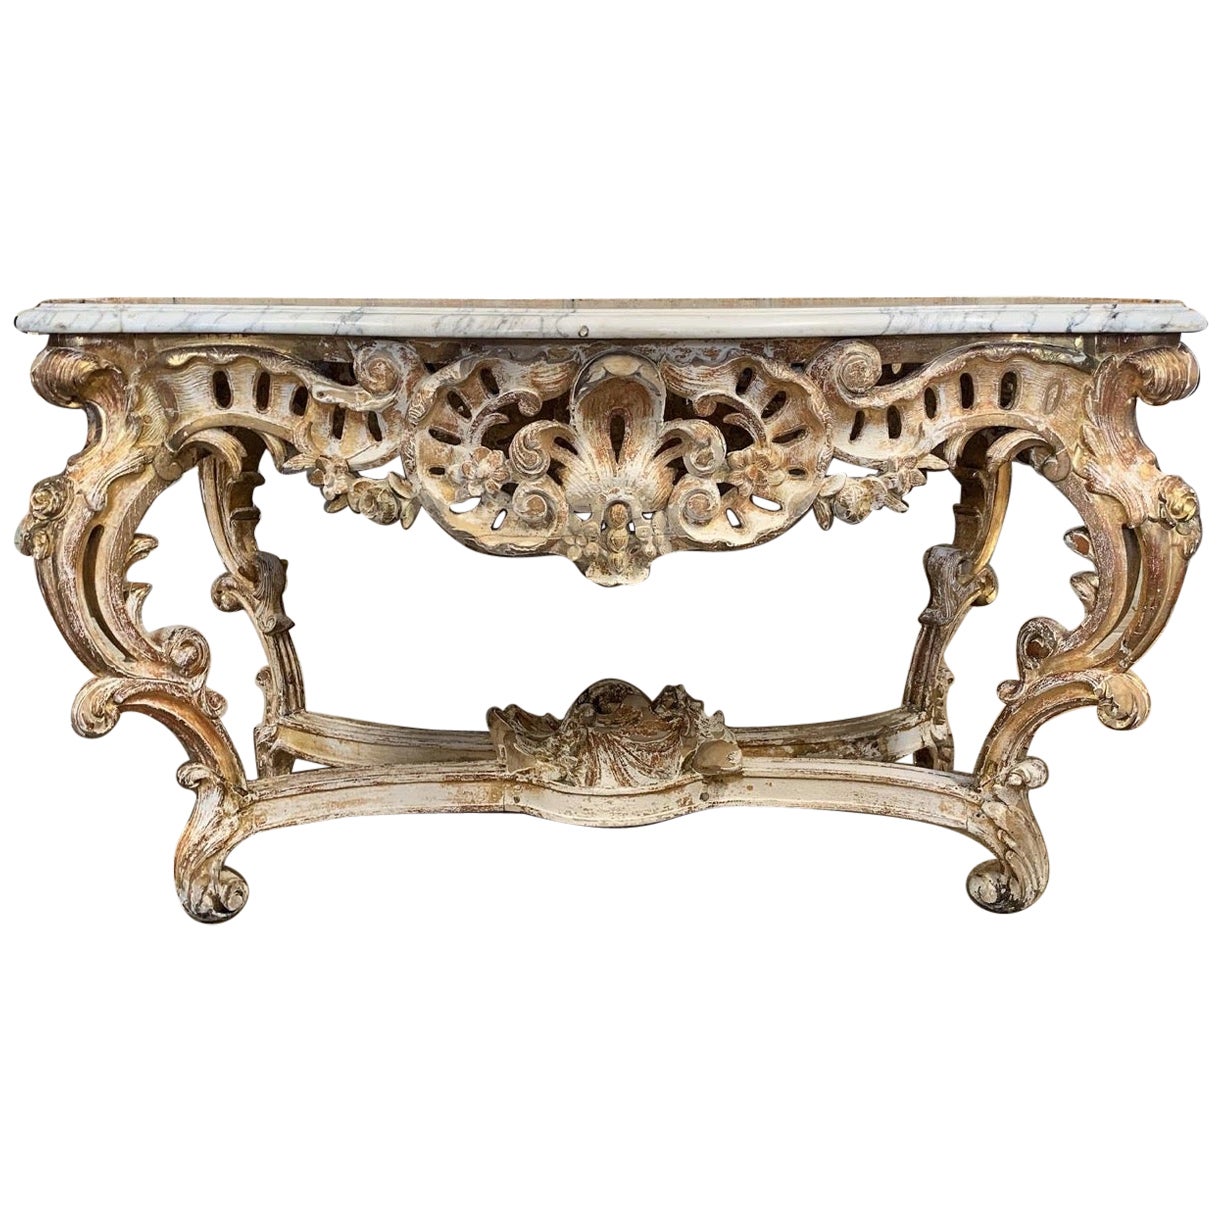 19th Century Gilded Carved Wood Rococo Center Table